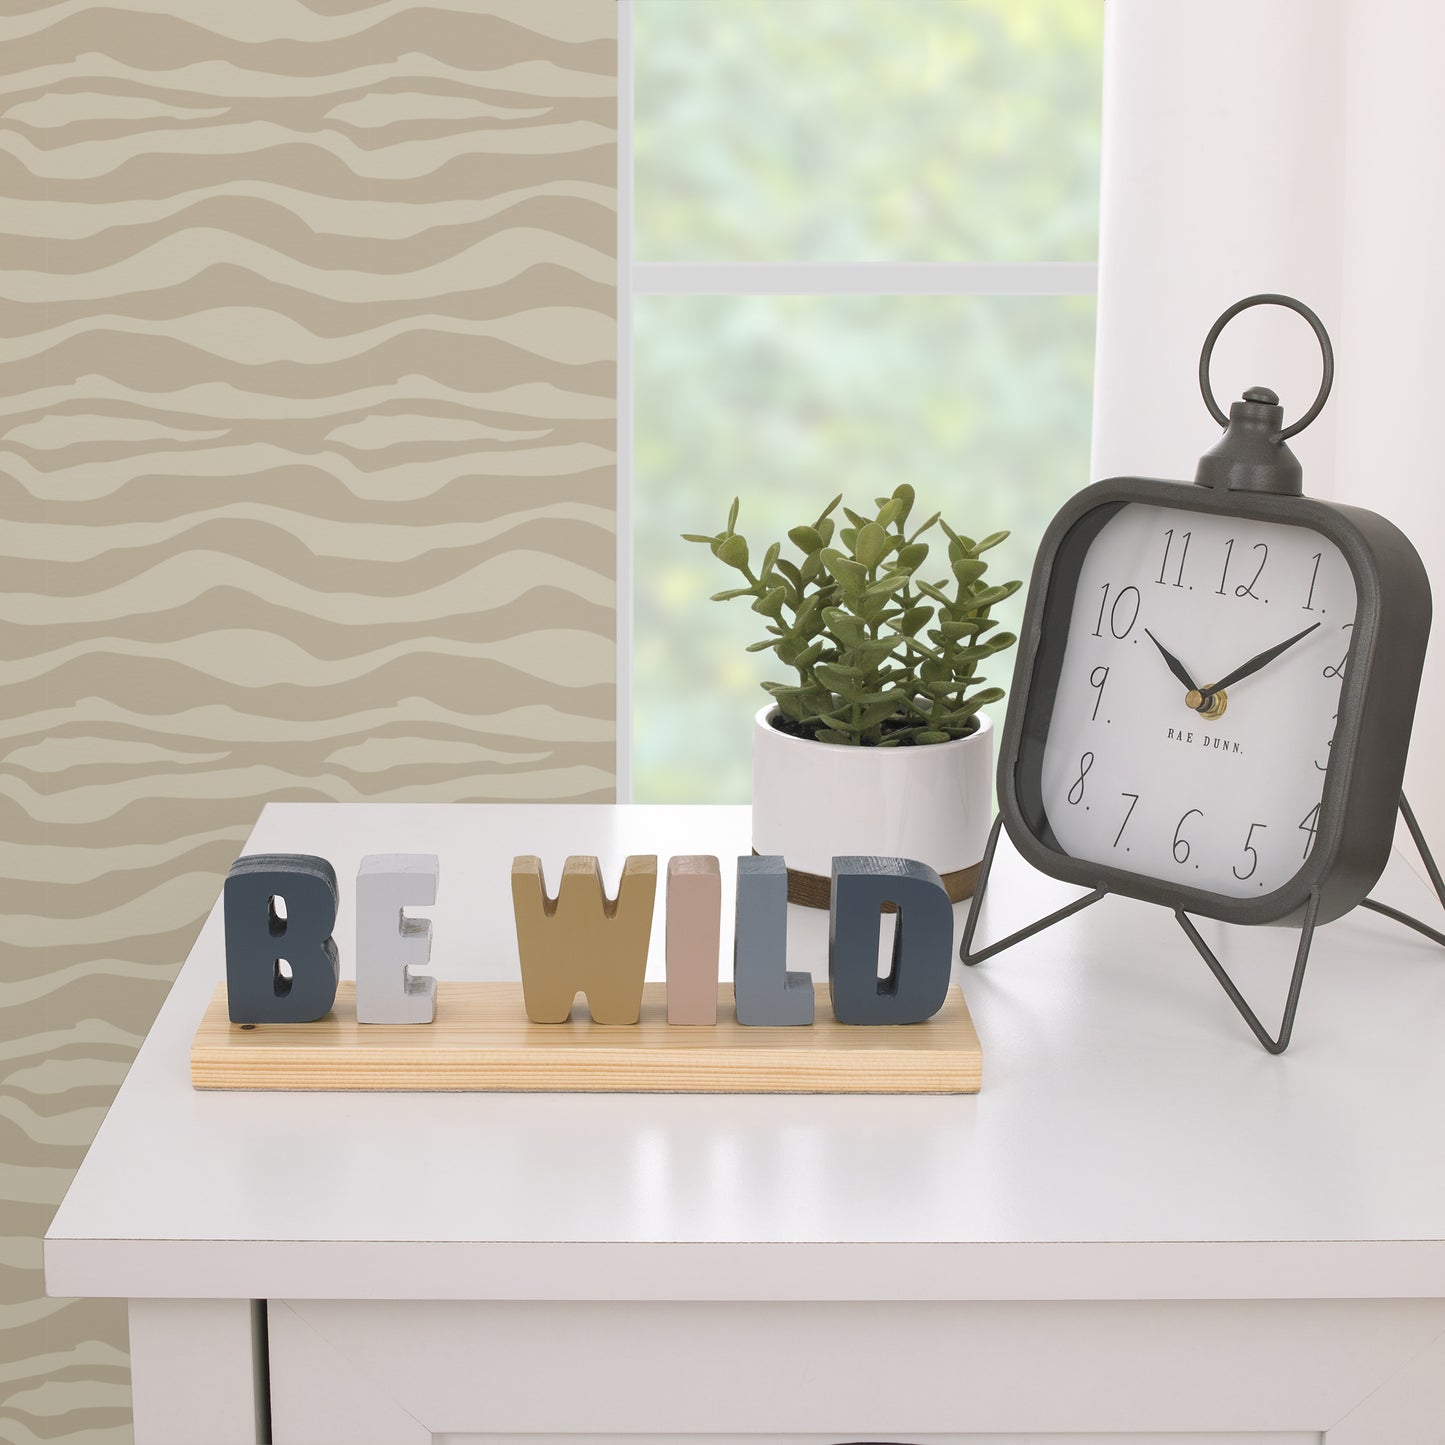 Little Love by NoJo Be Wild Shelfie Room Décor Blue, Gray, Gold and Cream Letters on Natural Wood Base